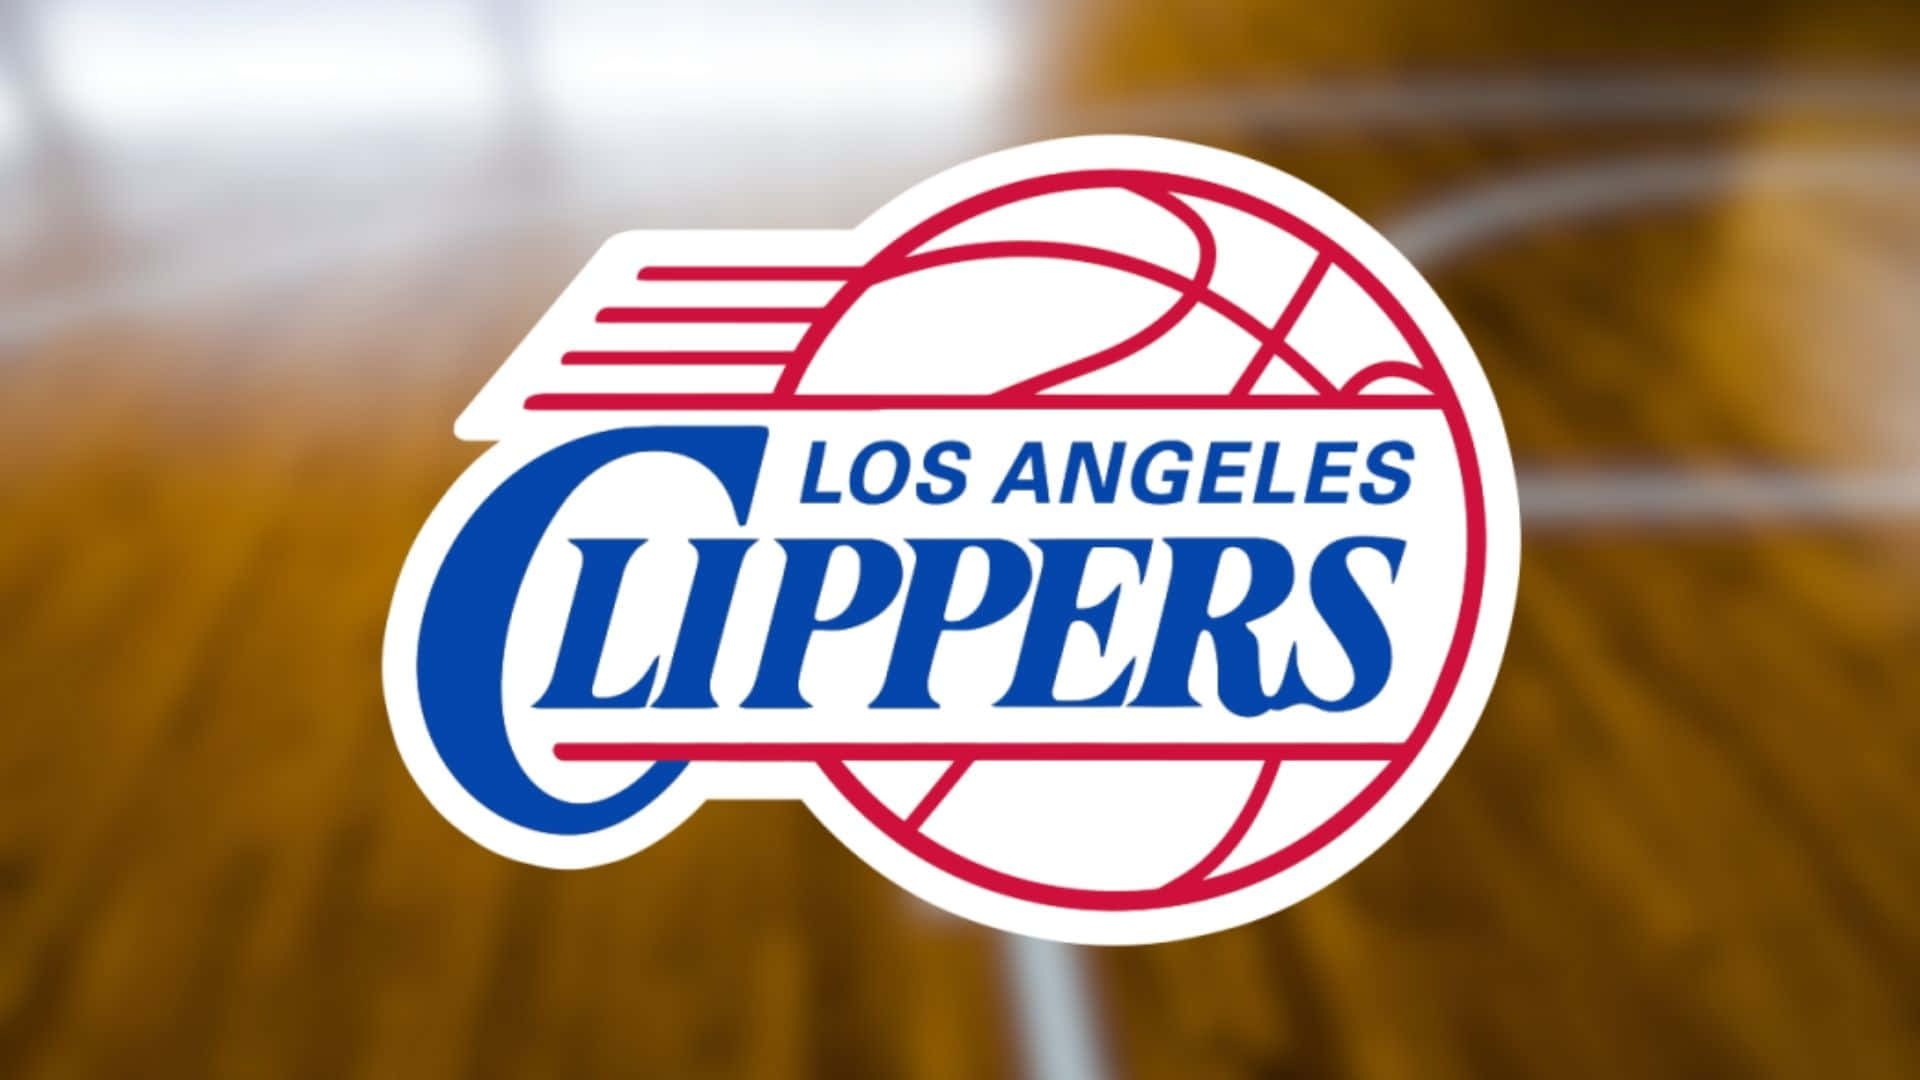 Get Ready For The Next Clippers Game Wallpaper